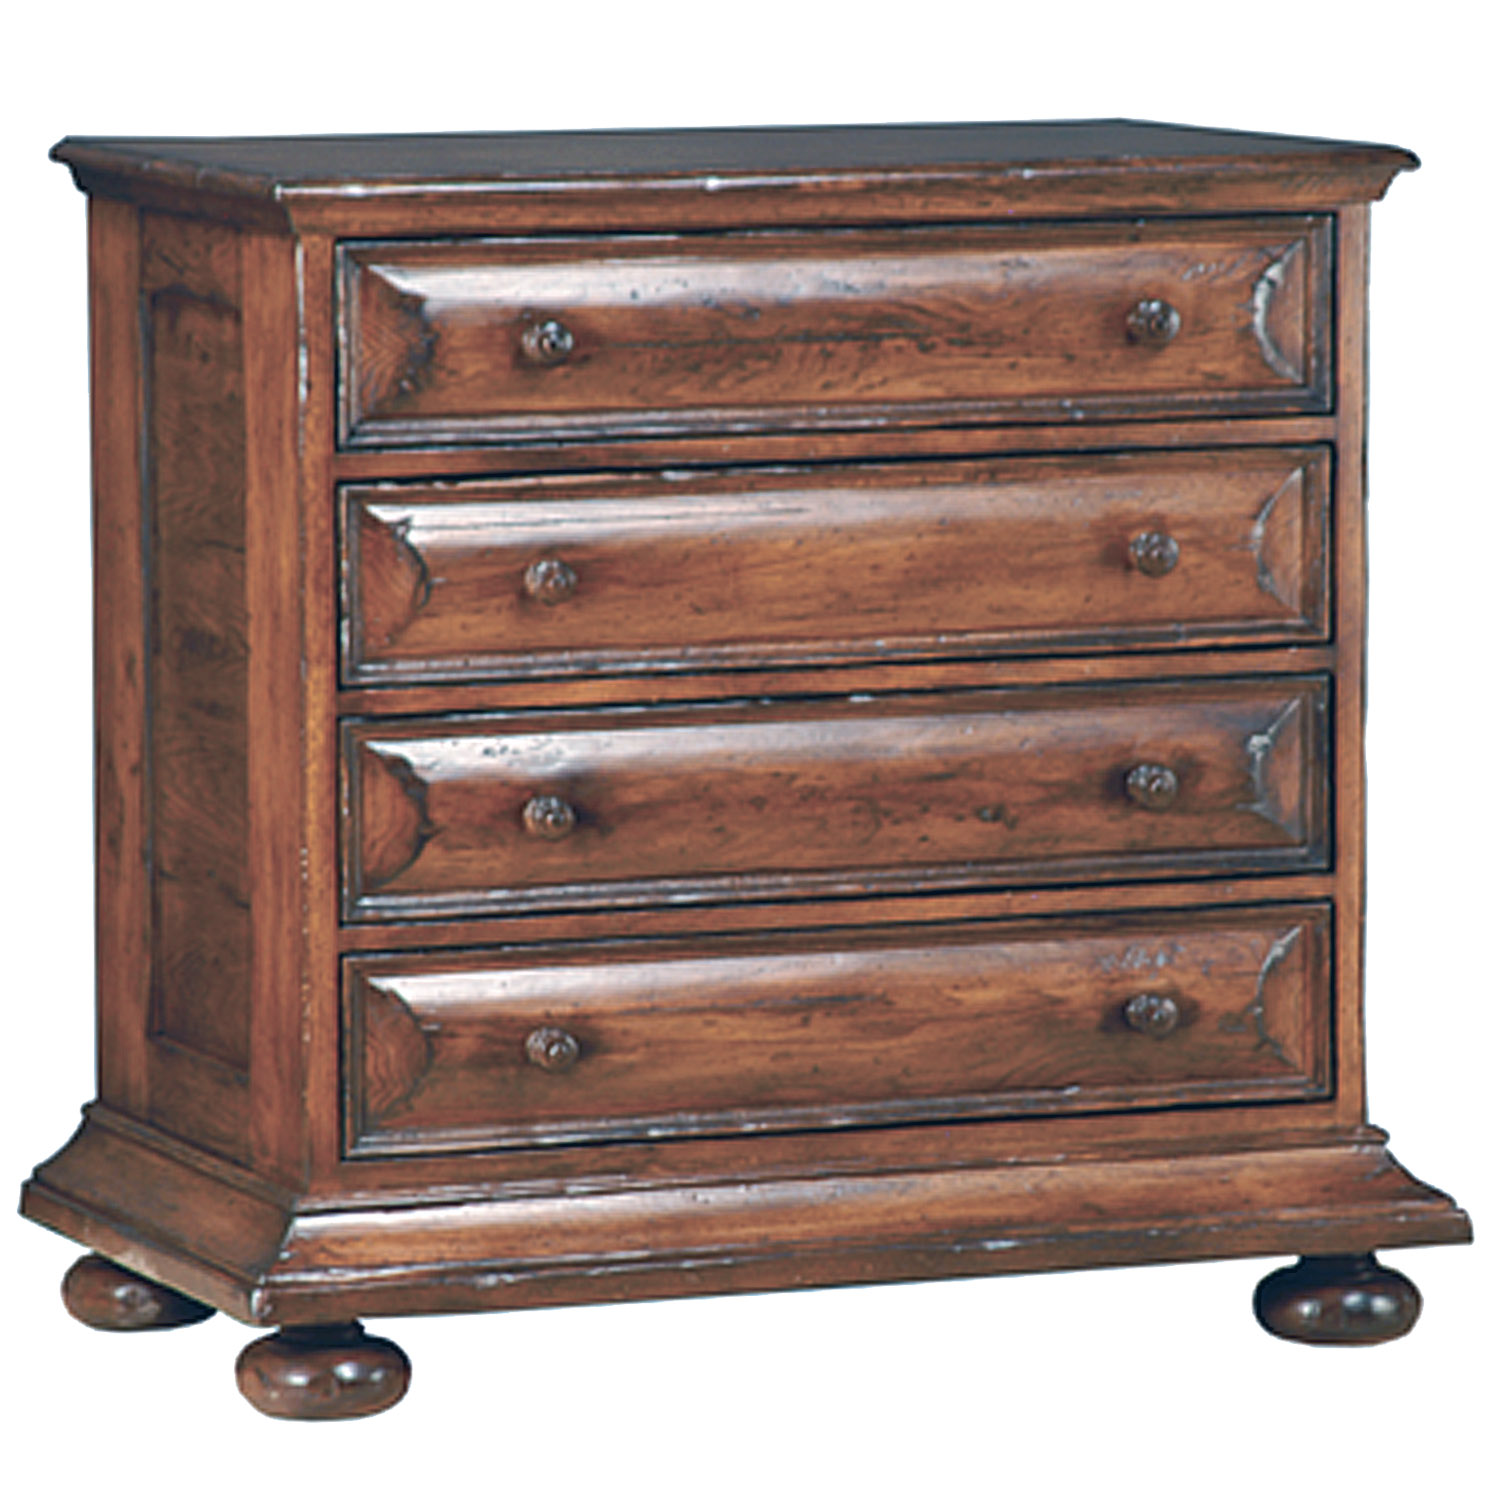 Madera tradtional chest of drawers dresser with bun feet by Woodland furniture in Idaho Falls